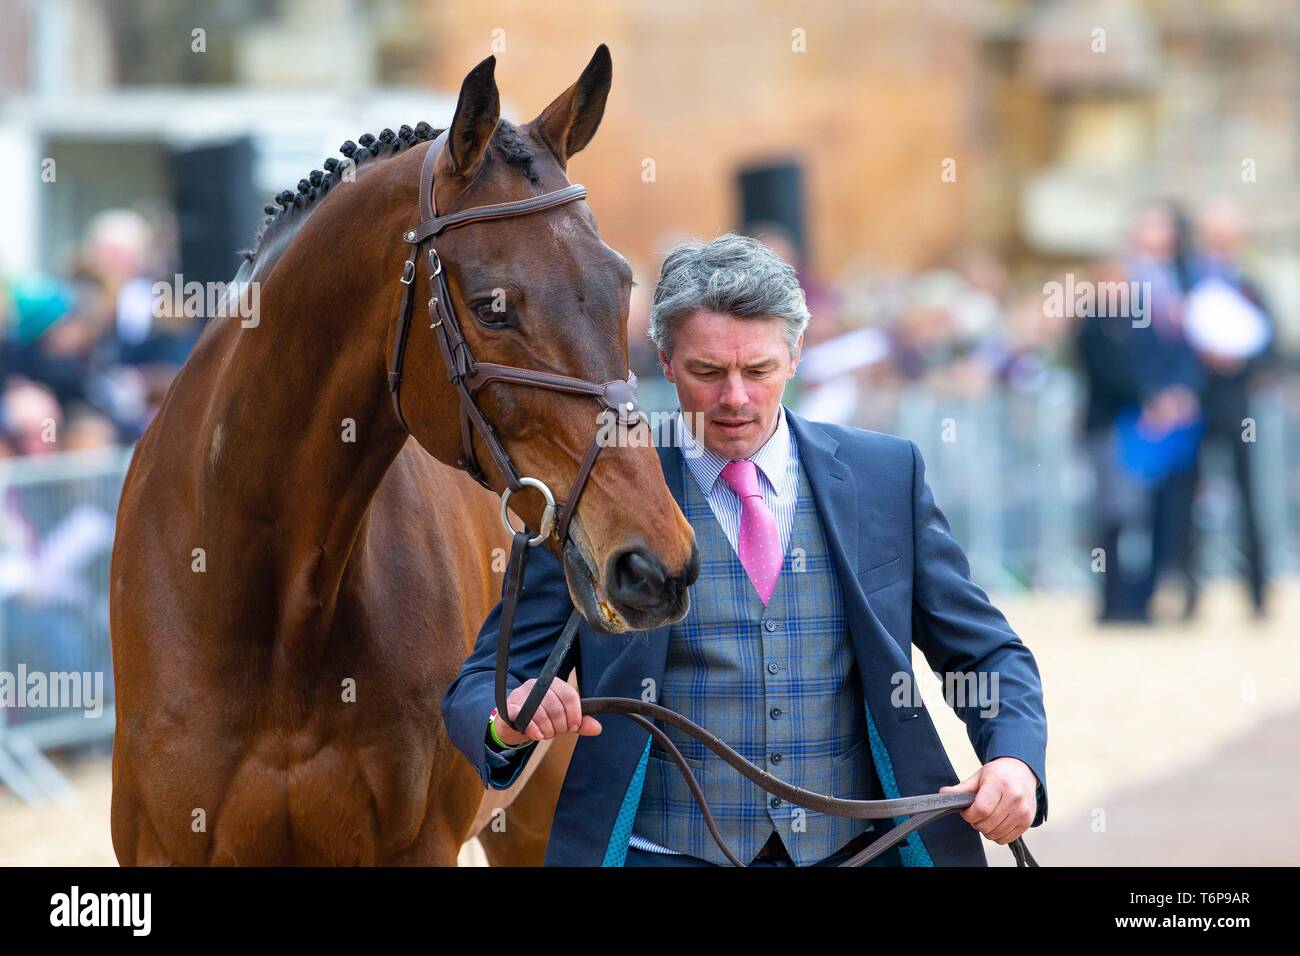 Badminton, Gloucestershire, UK. 02nd May, 2019. Jim Newson. IRL. Magennis. Trot Up. Mitsubishi Motors Badminton Horse Trials. Rolex Grand Slam Event. Horse Trials. Eventing. Badminton. Gloucestershire. United Kingdom. GBR. {01}/{05}/{2019}. Credit: Sport In Pictures/Alamy Live News Stock Photo